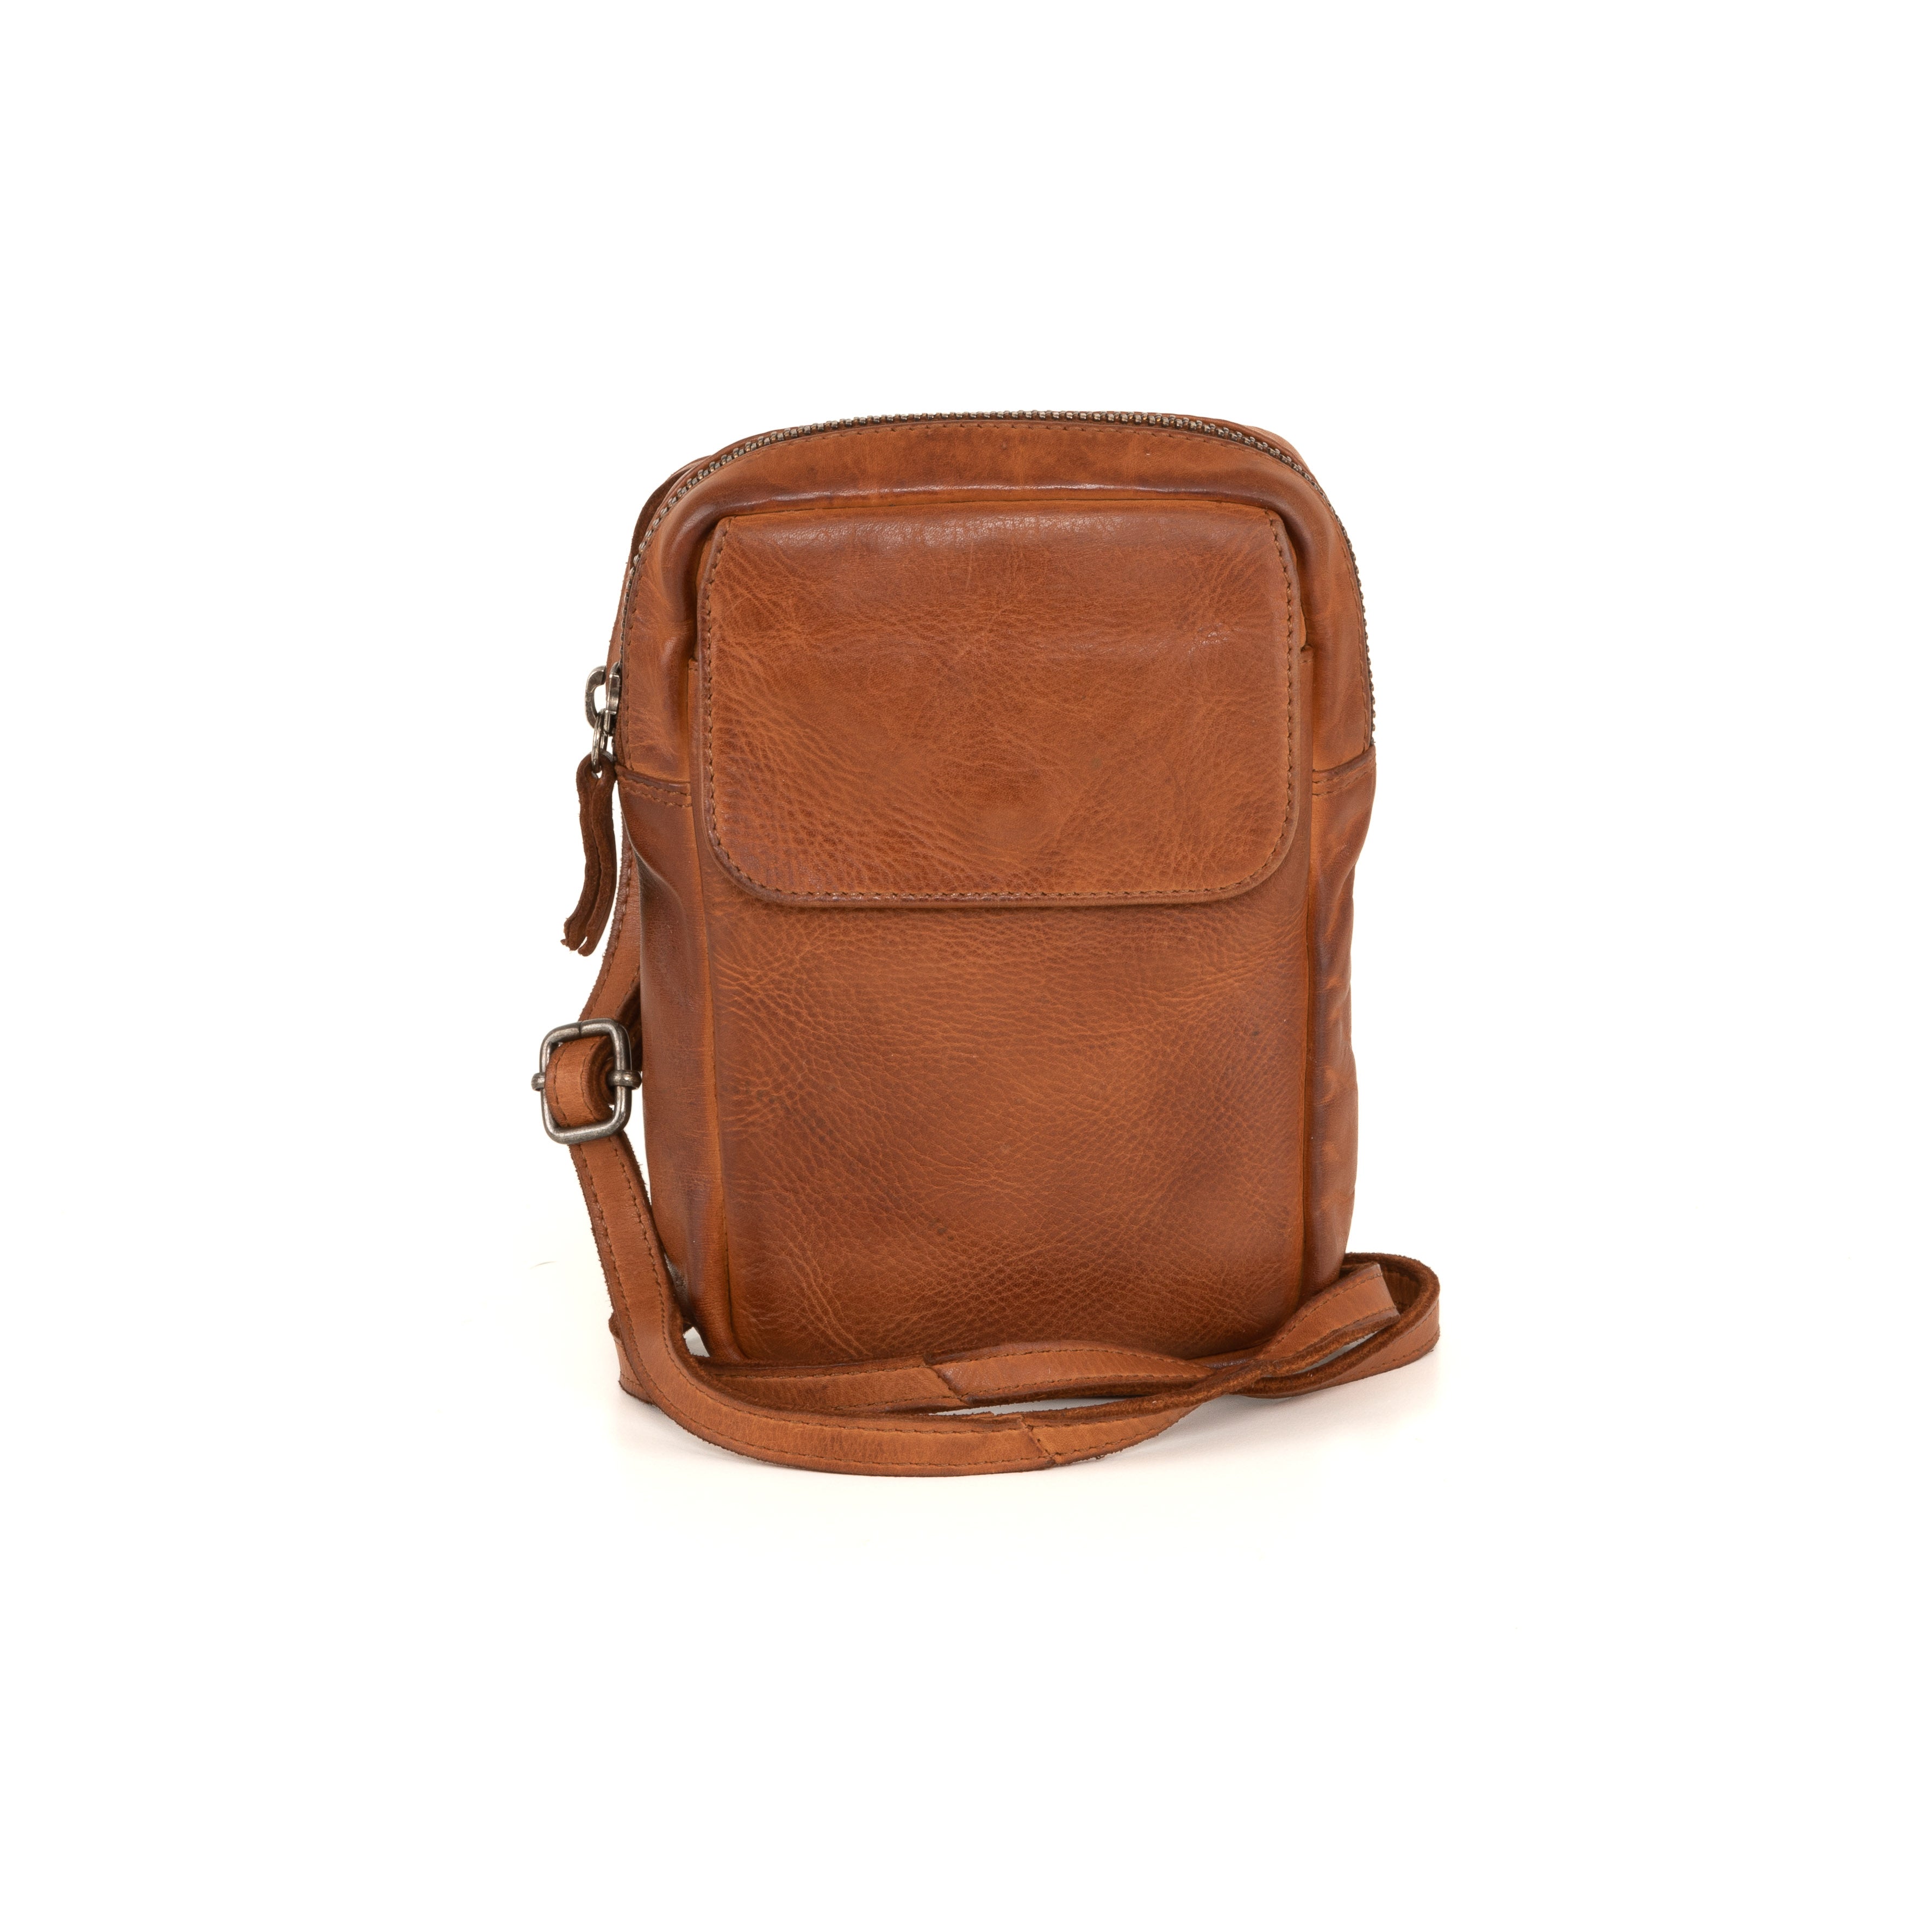 Brown leather crossbody bag with front pocket and adjustable strap